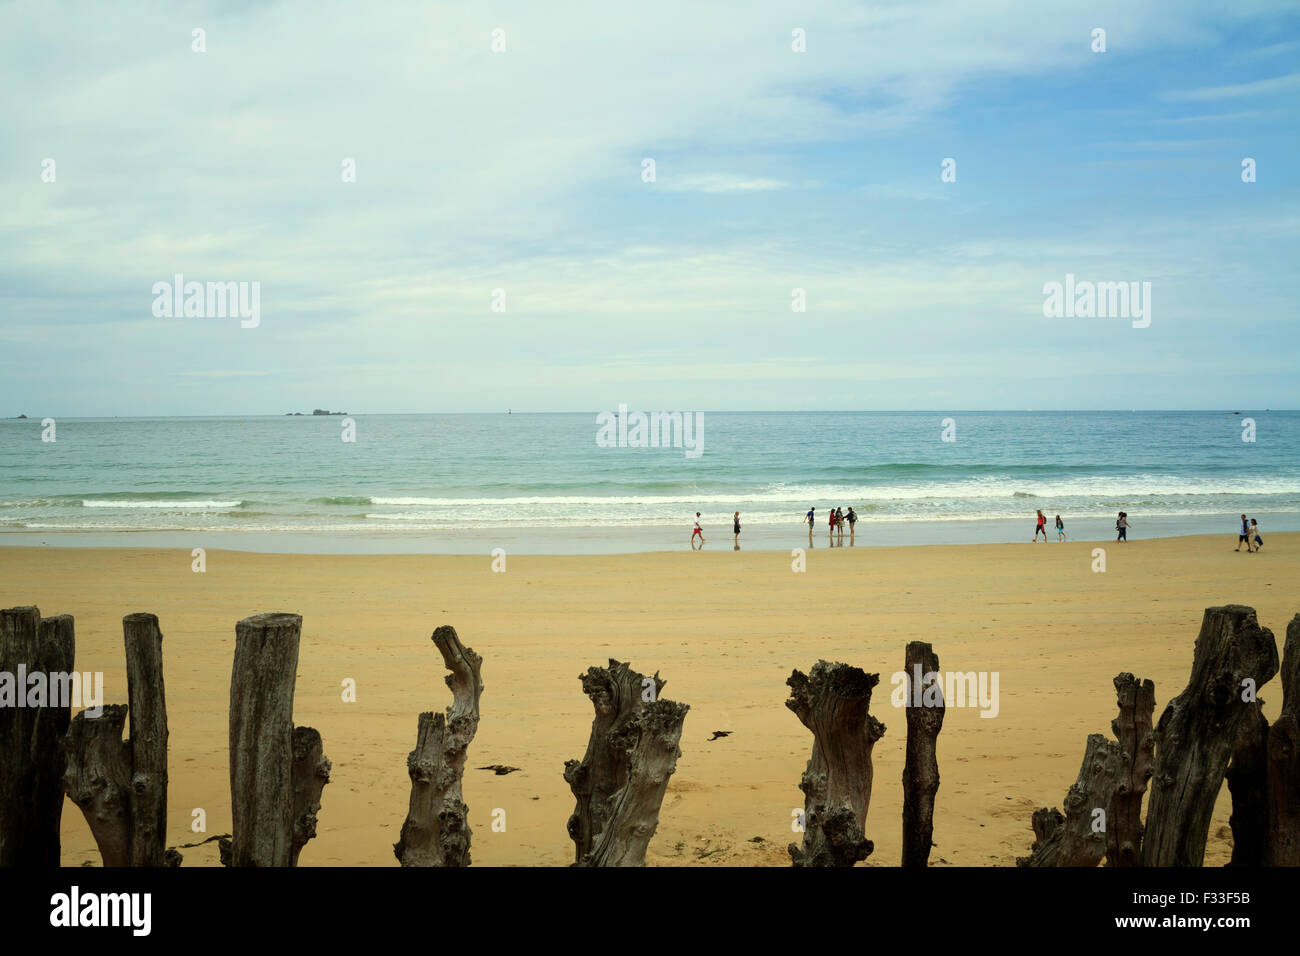 Barrier of wooden posts on a beach, Saint Malo, Brittany, France, Europe. Stock Photo